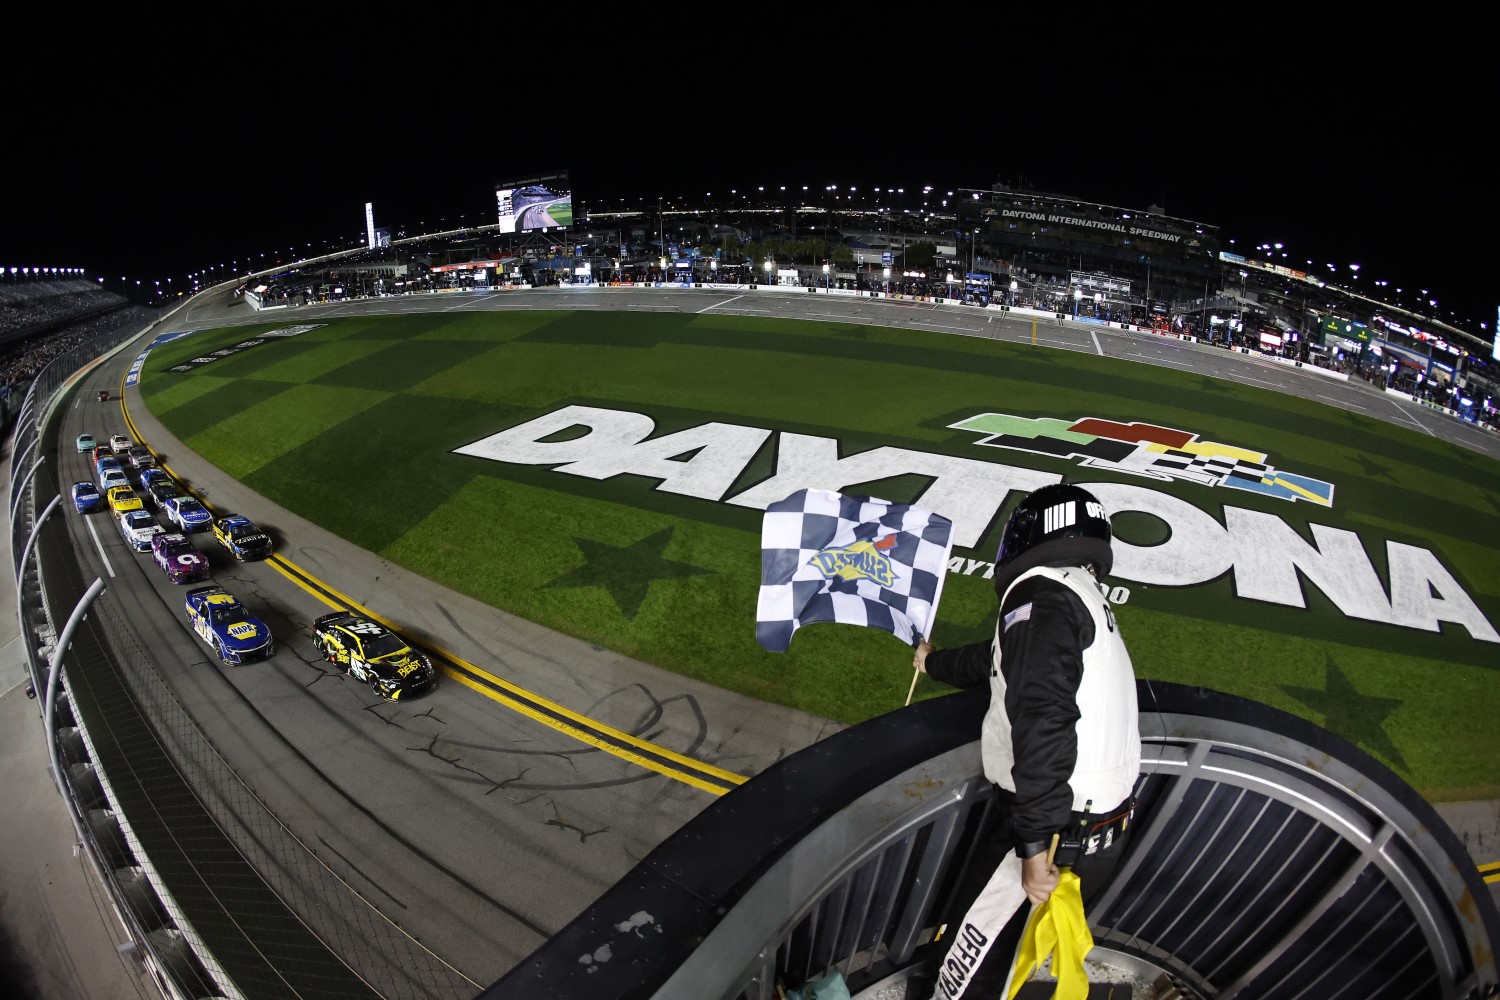 Tyler Reddick, driver of the #45 Nasty Beast Toyota, takes the checkered flag to win the NASCAR Cup Series Bluegreen Vacations Duel #1 at Daytona International Speedway on February 15, 2024 in Daytona Beach, Florida. (Photo by James Gilbert/Getty Images)